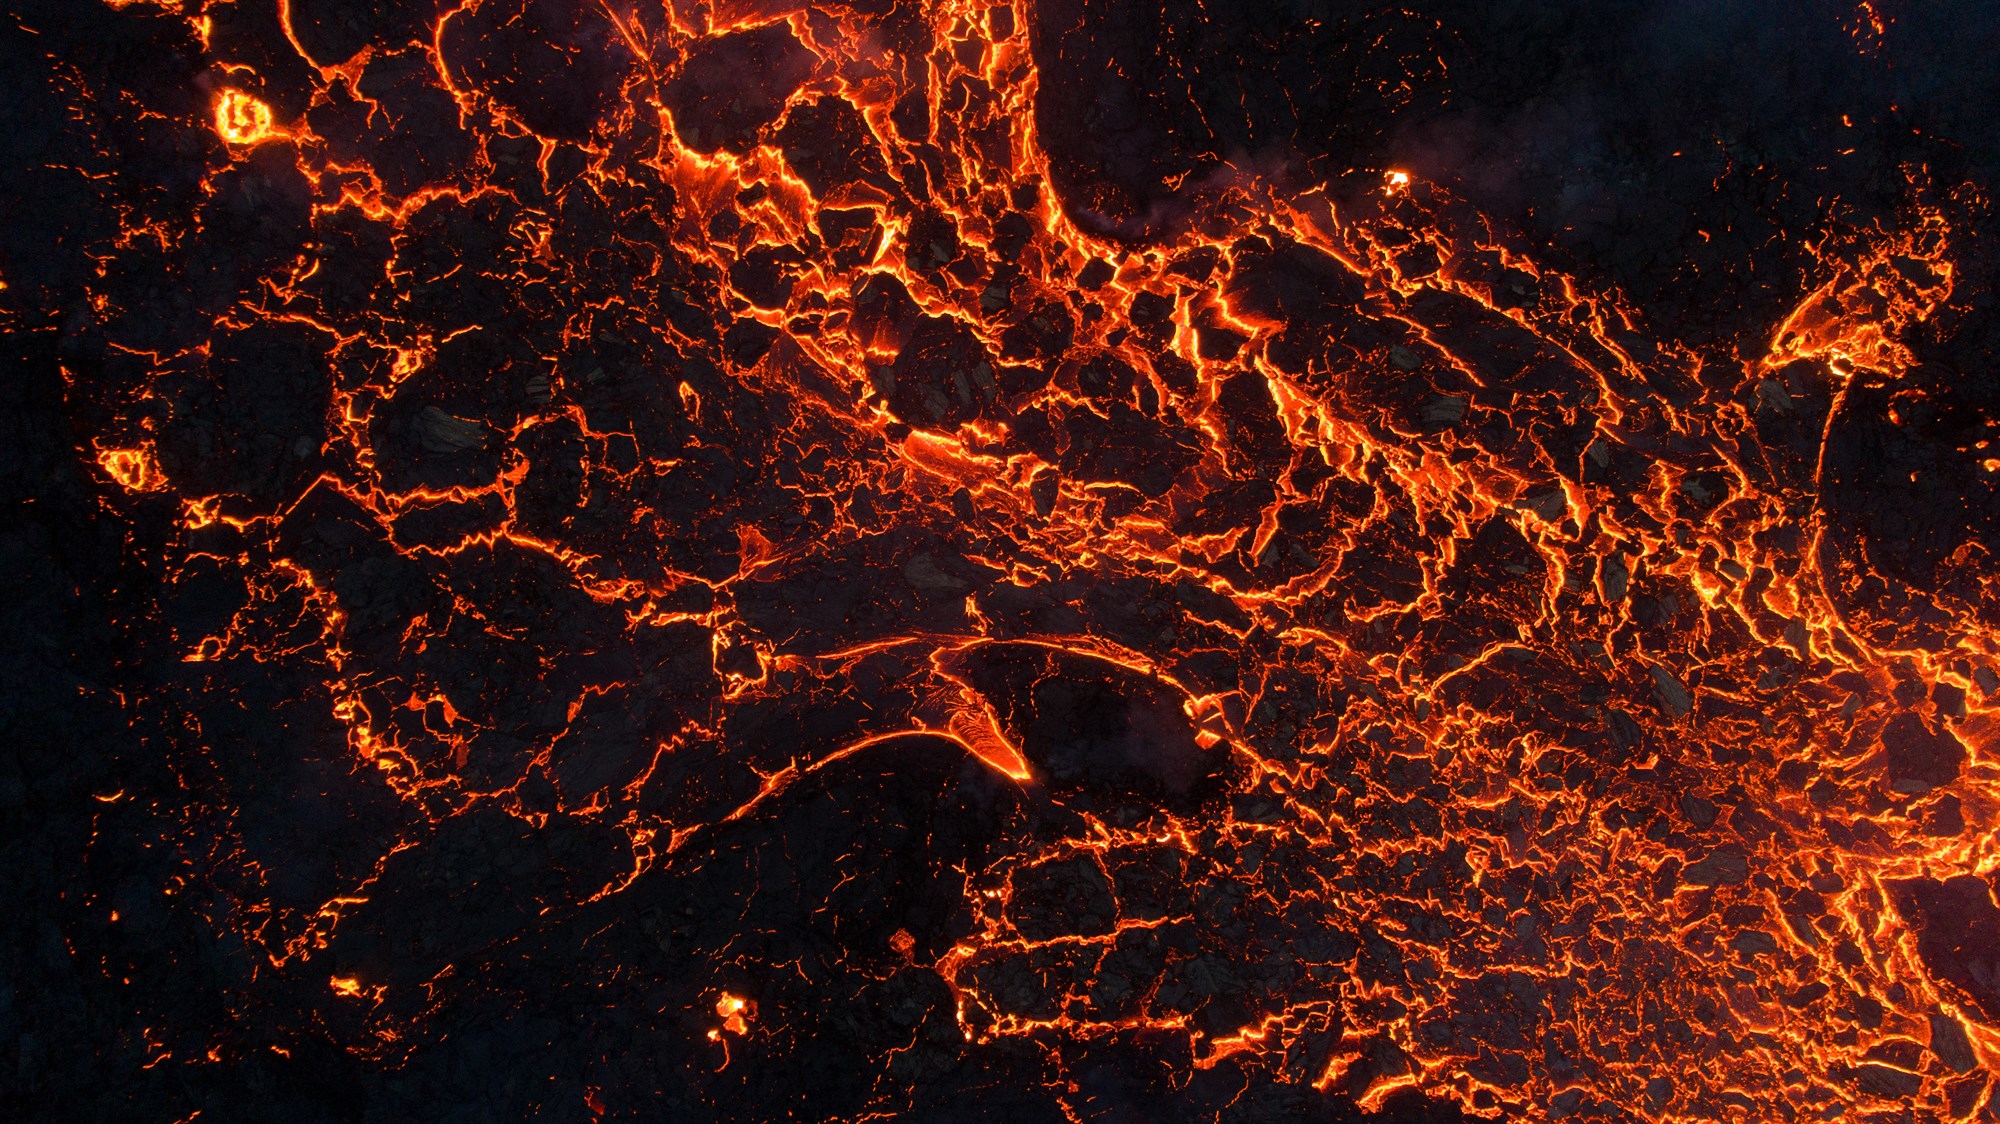 Glowing field of lava from Icelandic volcano eruption.